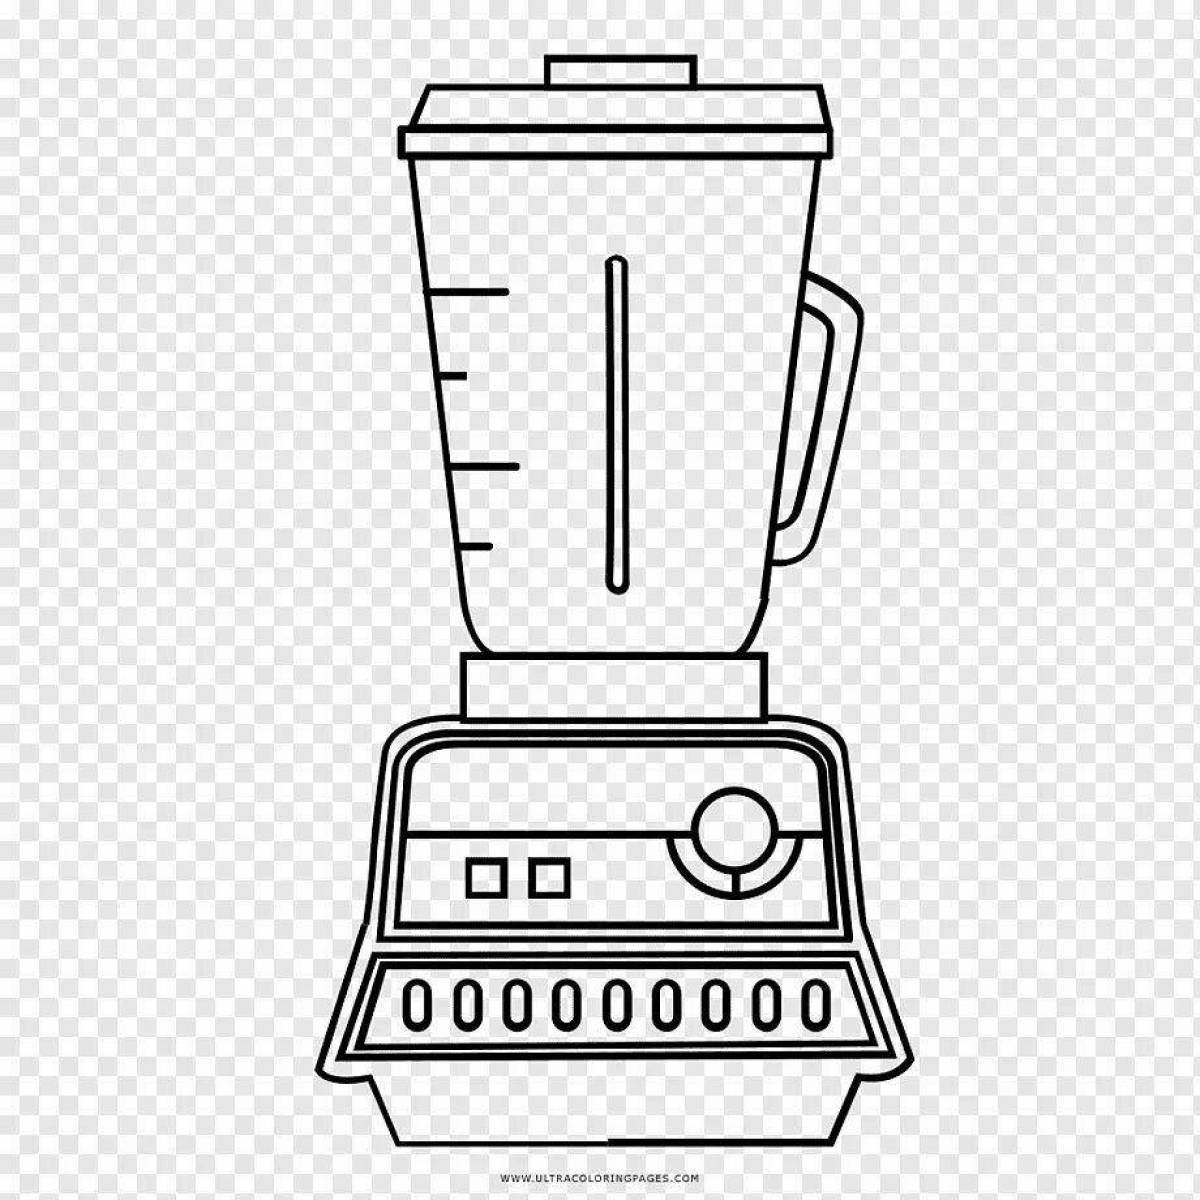 Adorable coloring book household appliances for the little ones